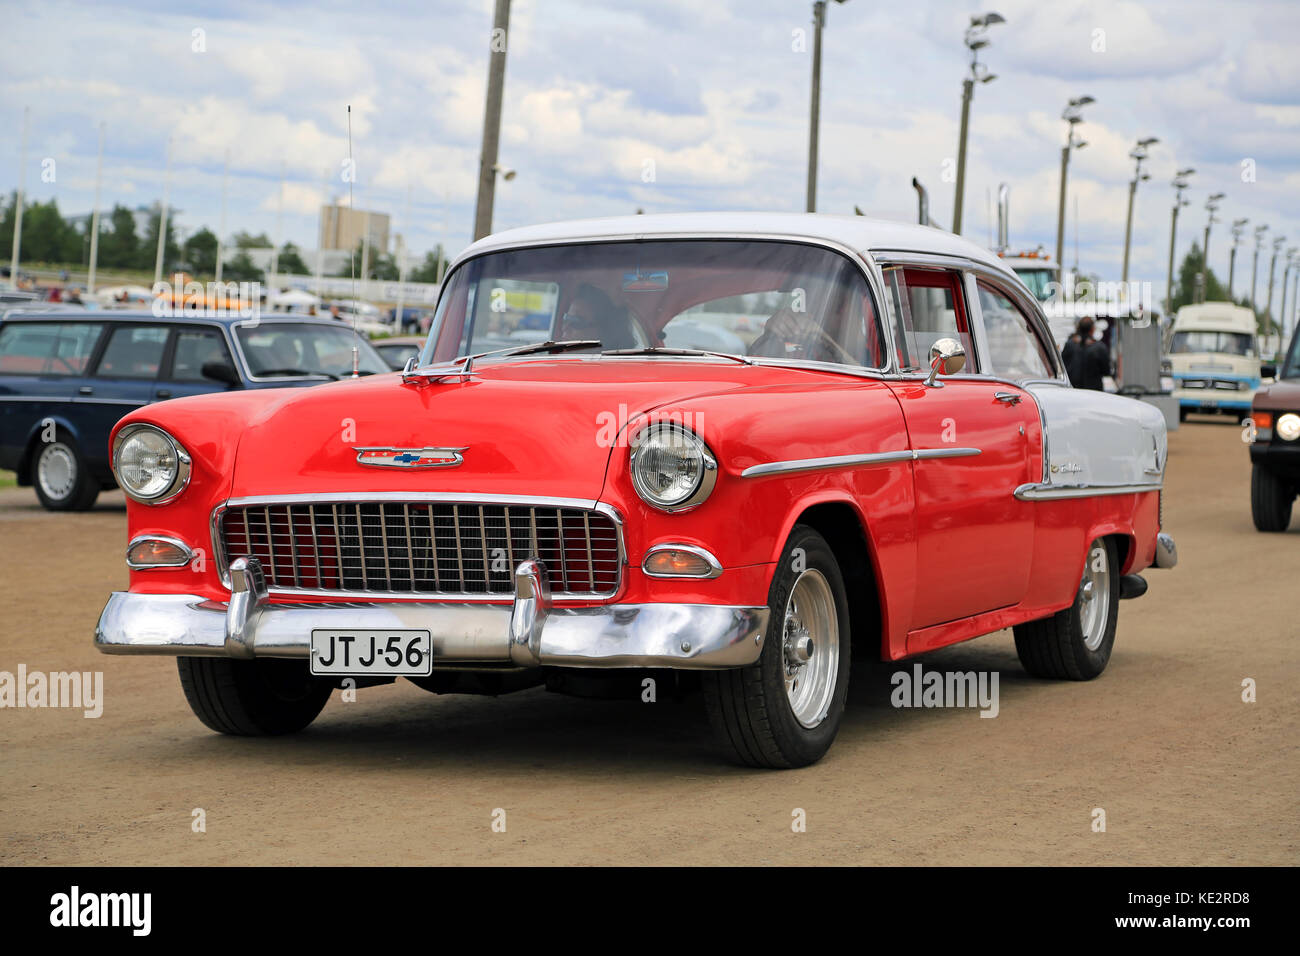 FORSSA, FINLAND - AUGUST 2, 2015: Classic car Chevrolet Bel Air of Second generation, manufactured between 1954-57, on the public event of Pick-Nick C Stock Photo